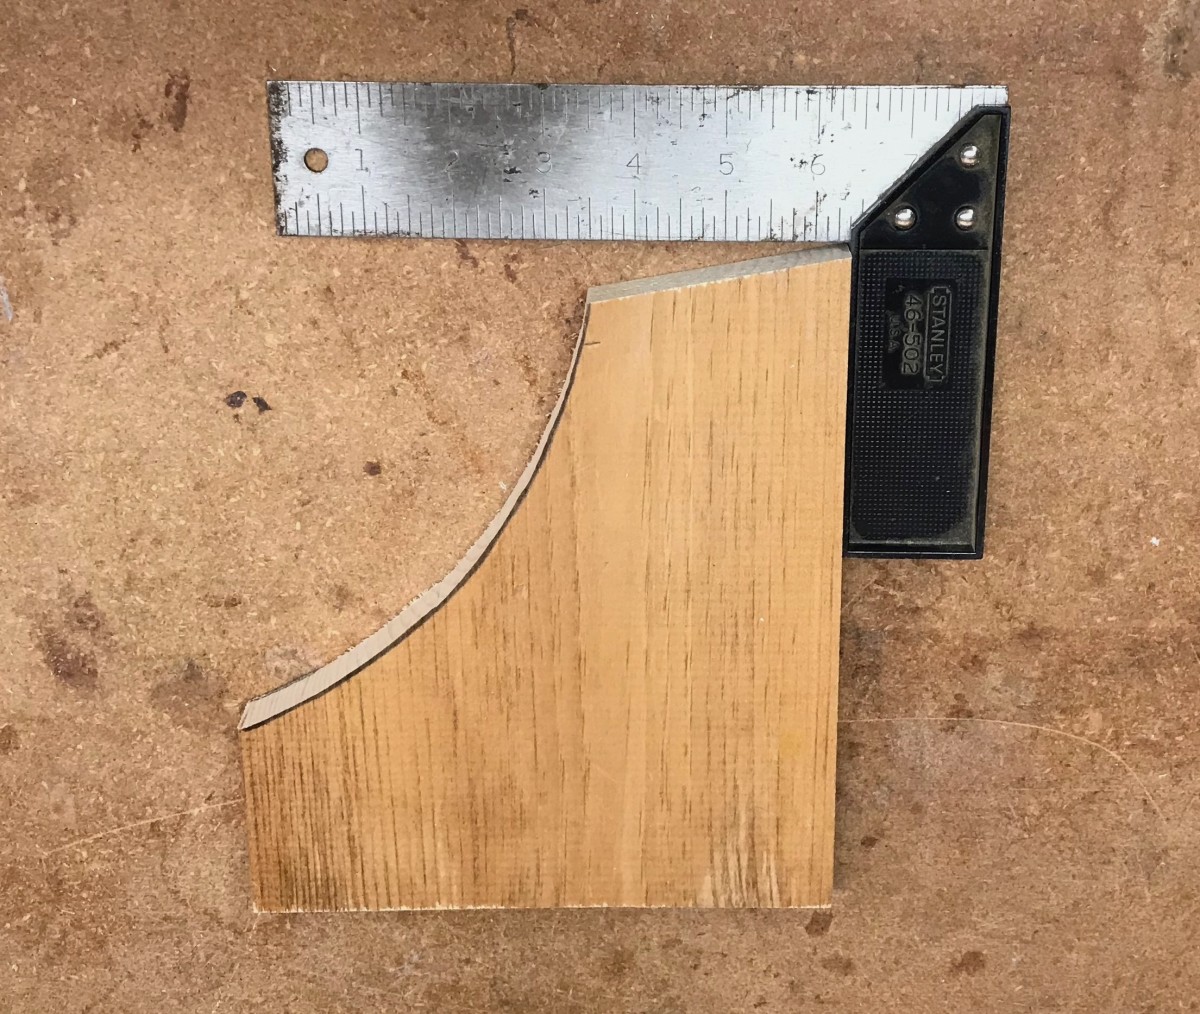 The top edge of the side pieces are cut at a 10-degree angle